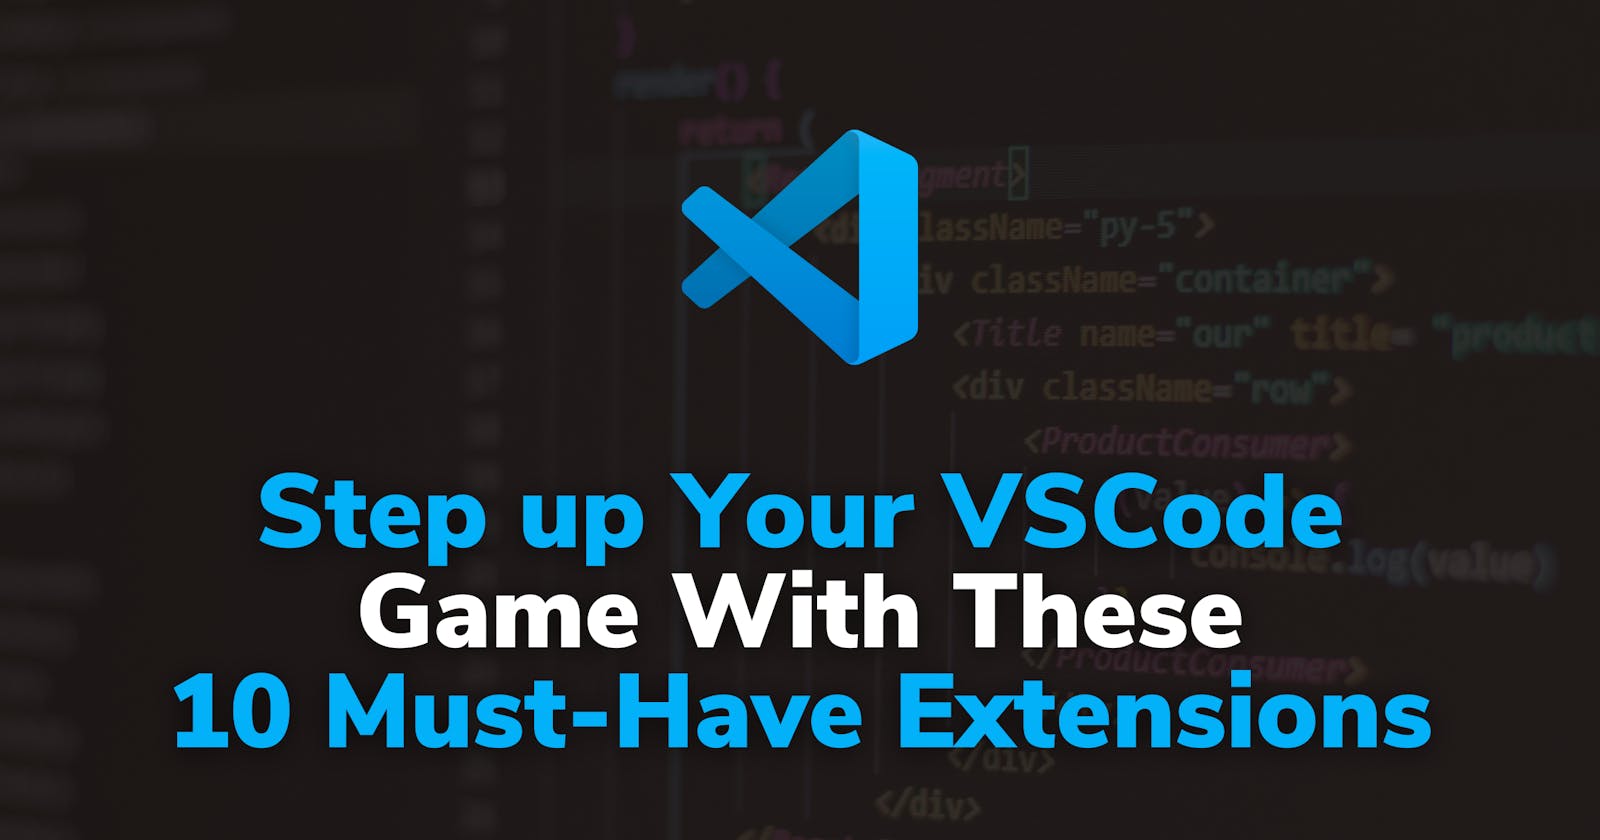 Step up Your VSCode Game With These 10 Must-Have Extensions